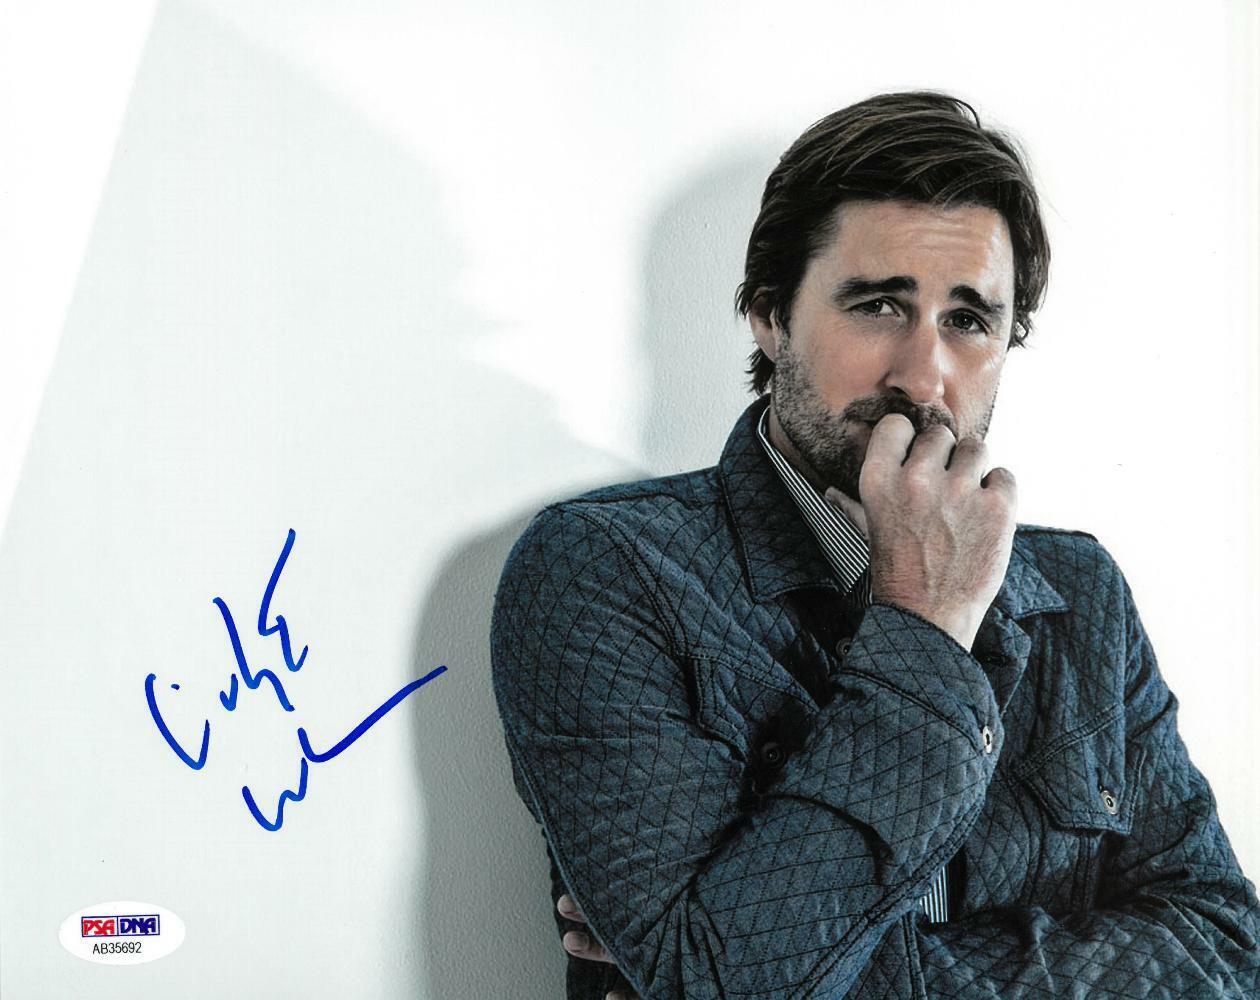 Luke Wilson Signed Authentic Autographed 8x10 Photo Poster painting PSA/DNA #AB35692